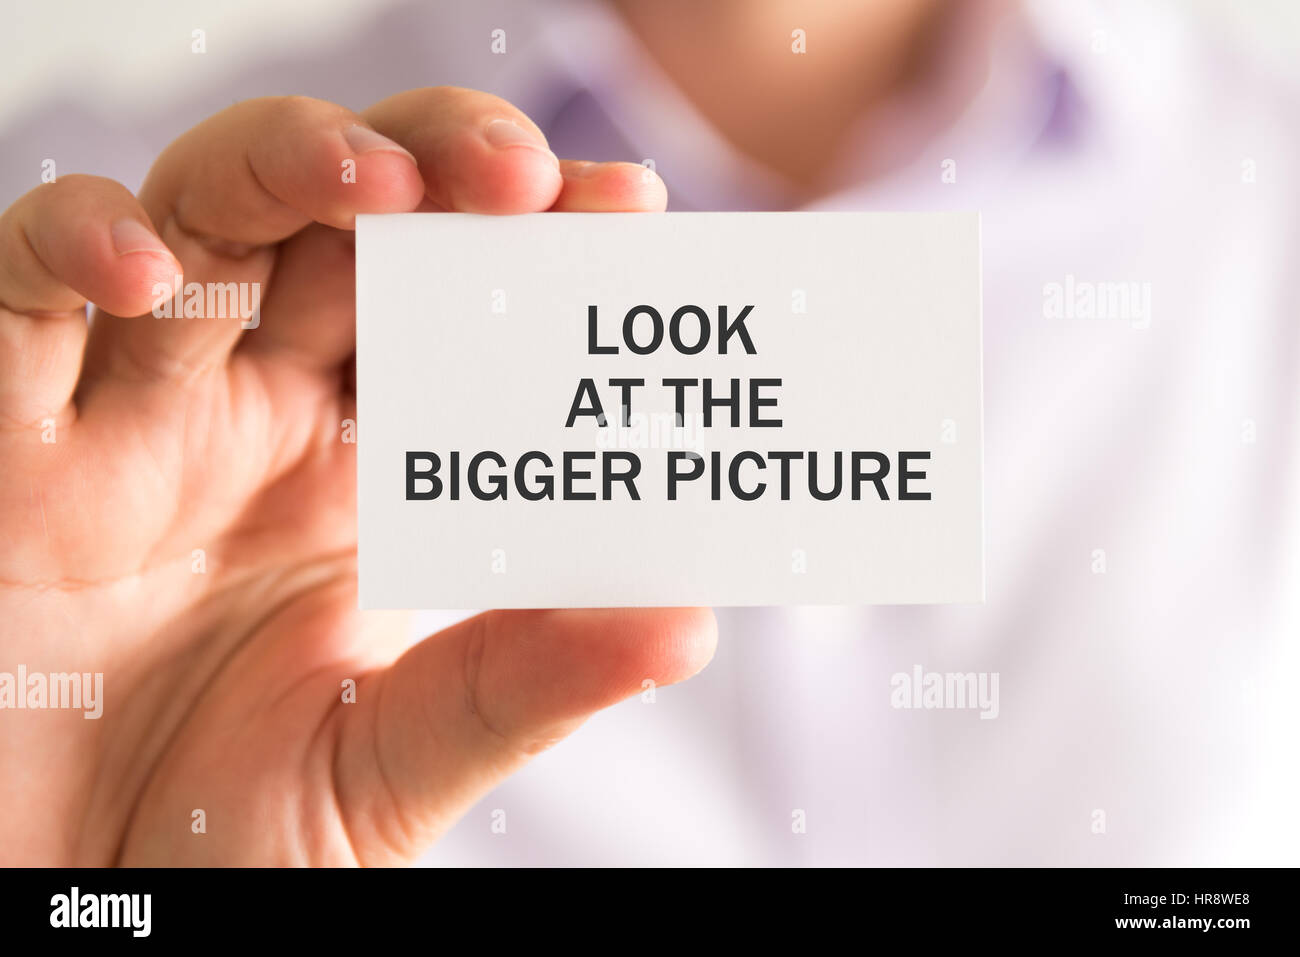 Closeup on businessman holding a card with LOOK AT THE BIGGER PICTURE message, business concept image with soft focus background and vintage tone Stock Photo